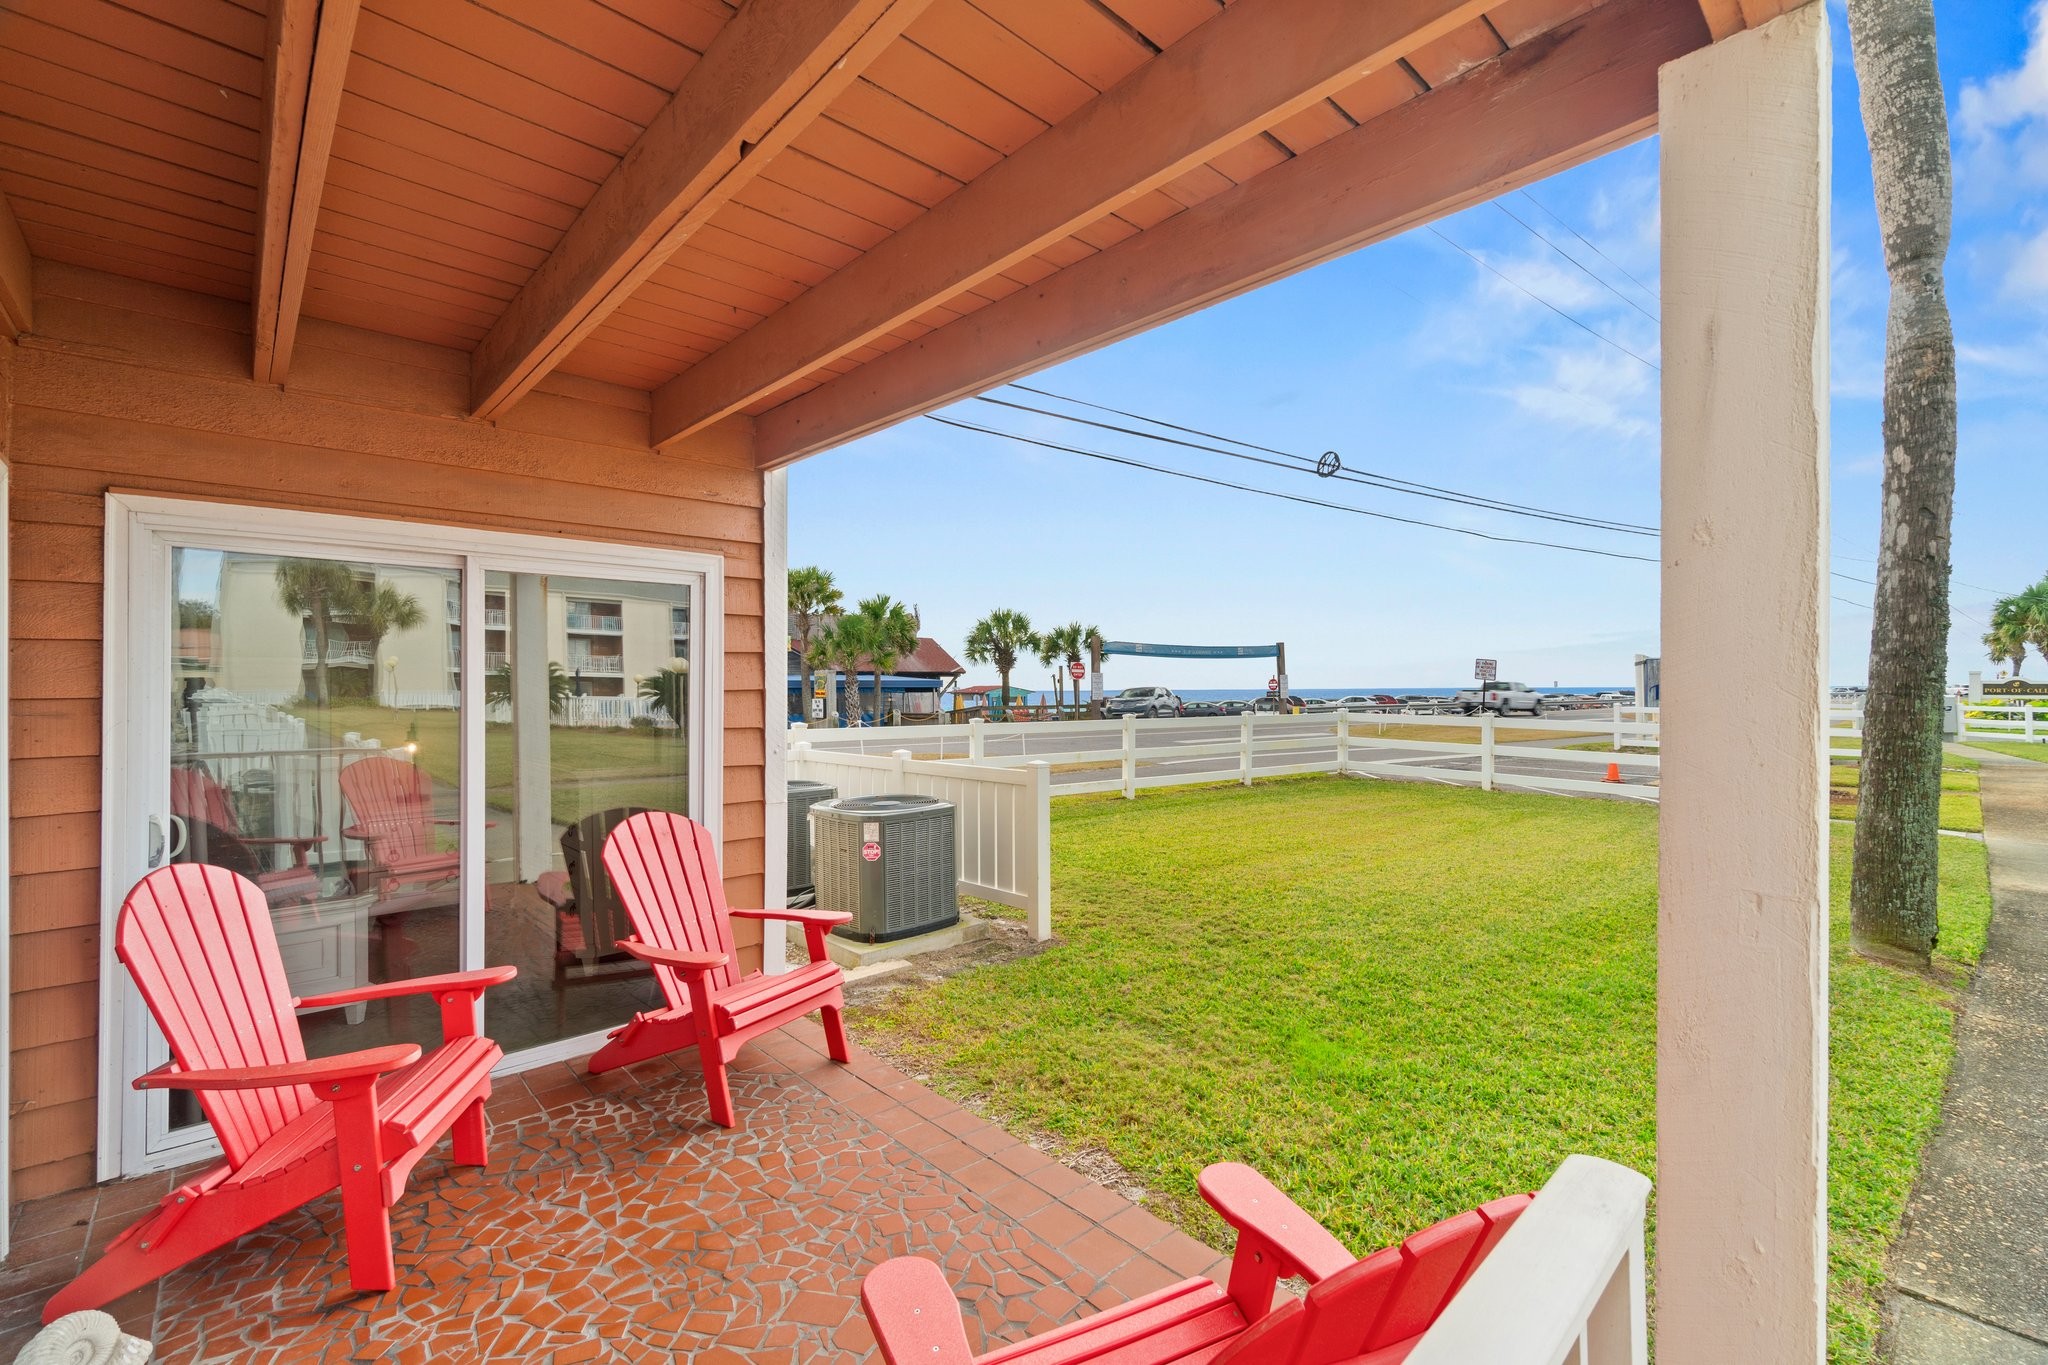 Private patio just steps away from Miramar Beach